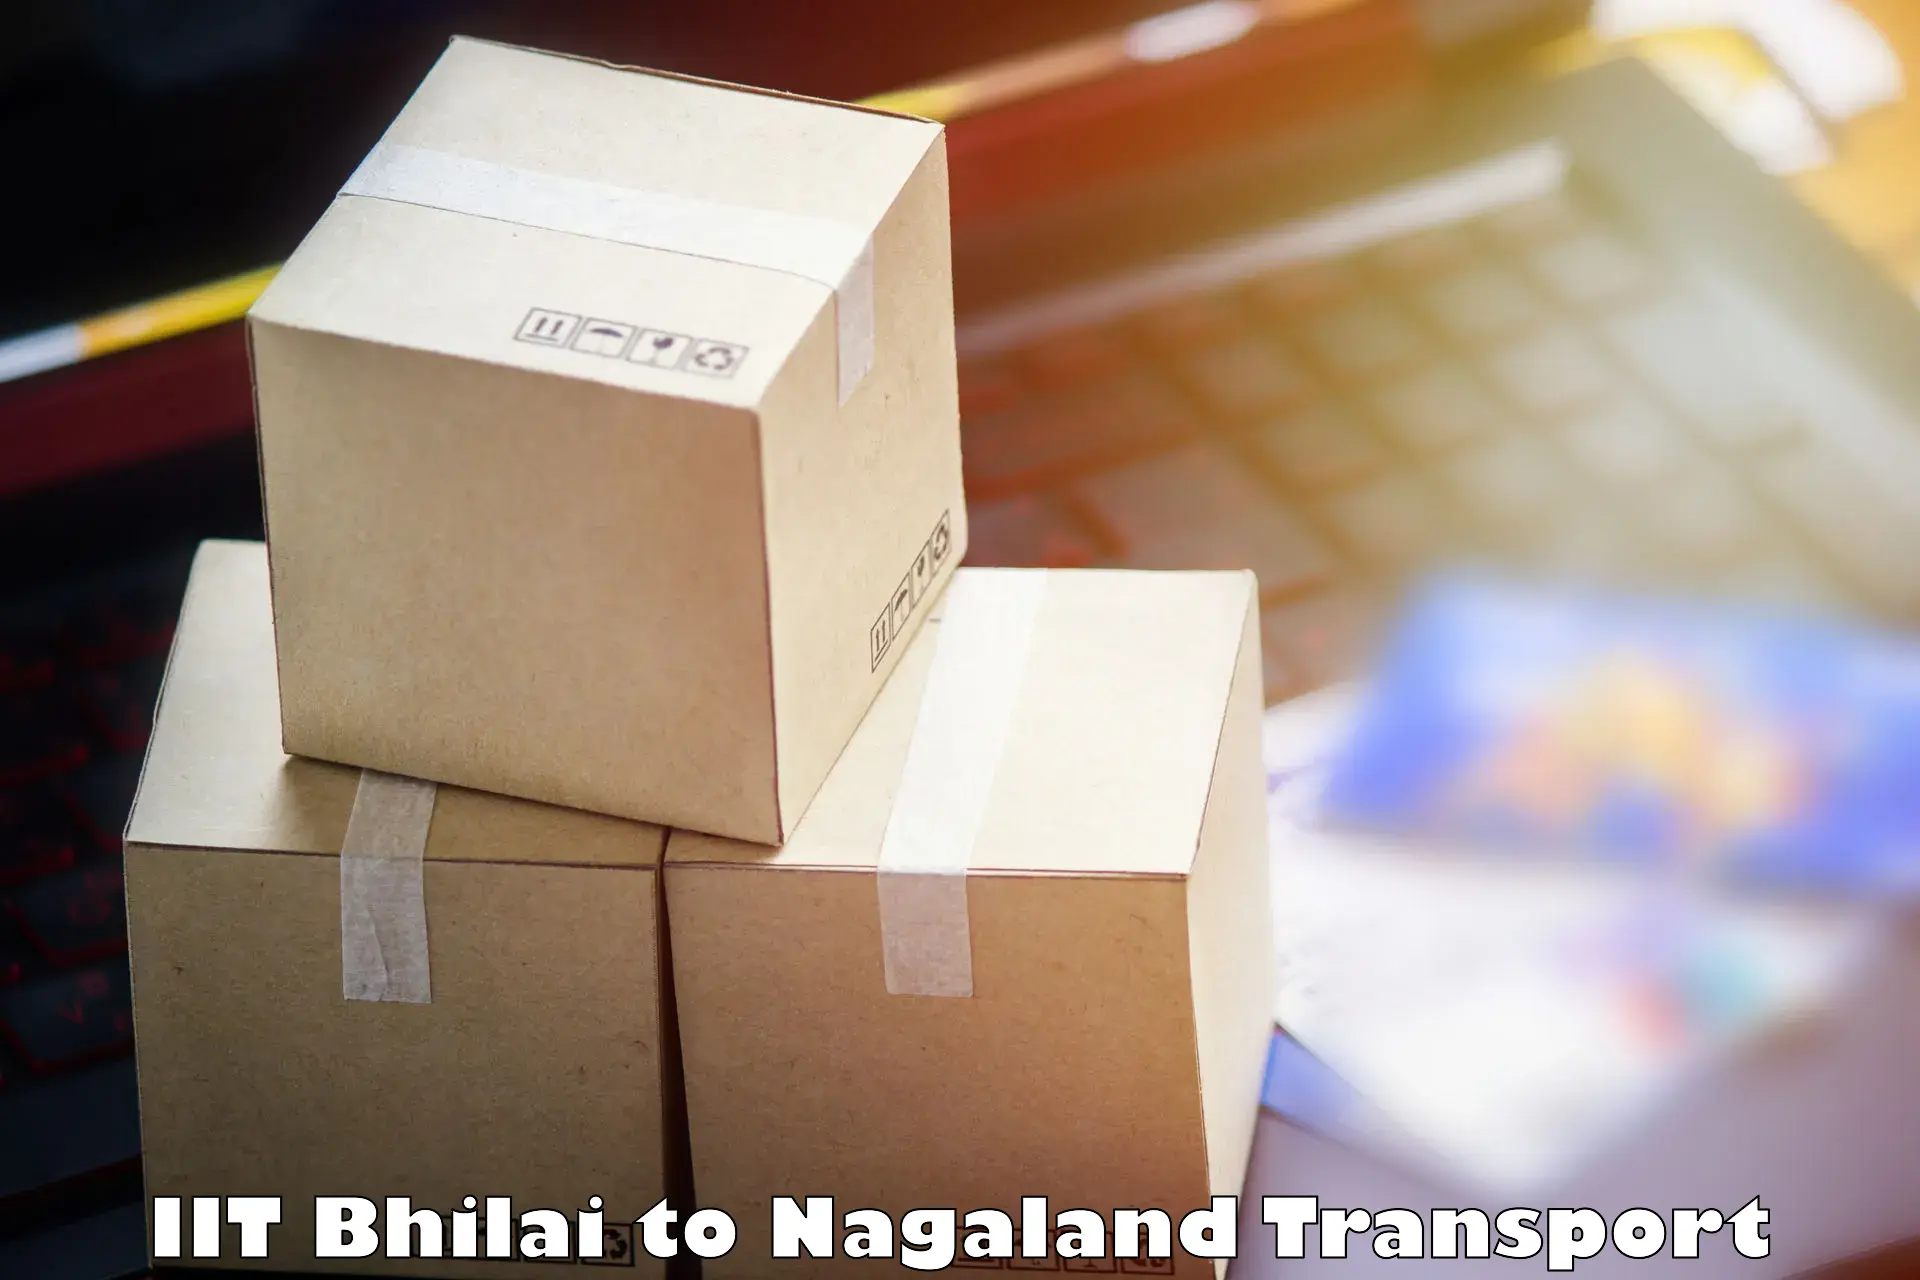 Container transport service IIT Bhilai to Mon